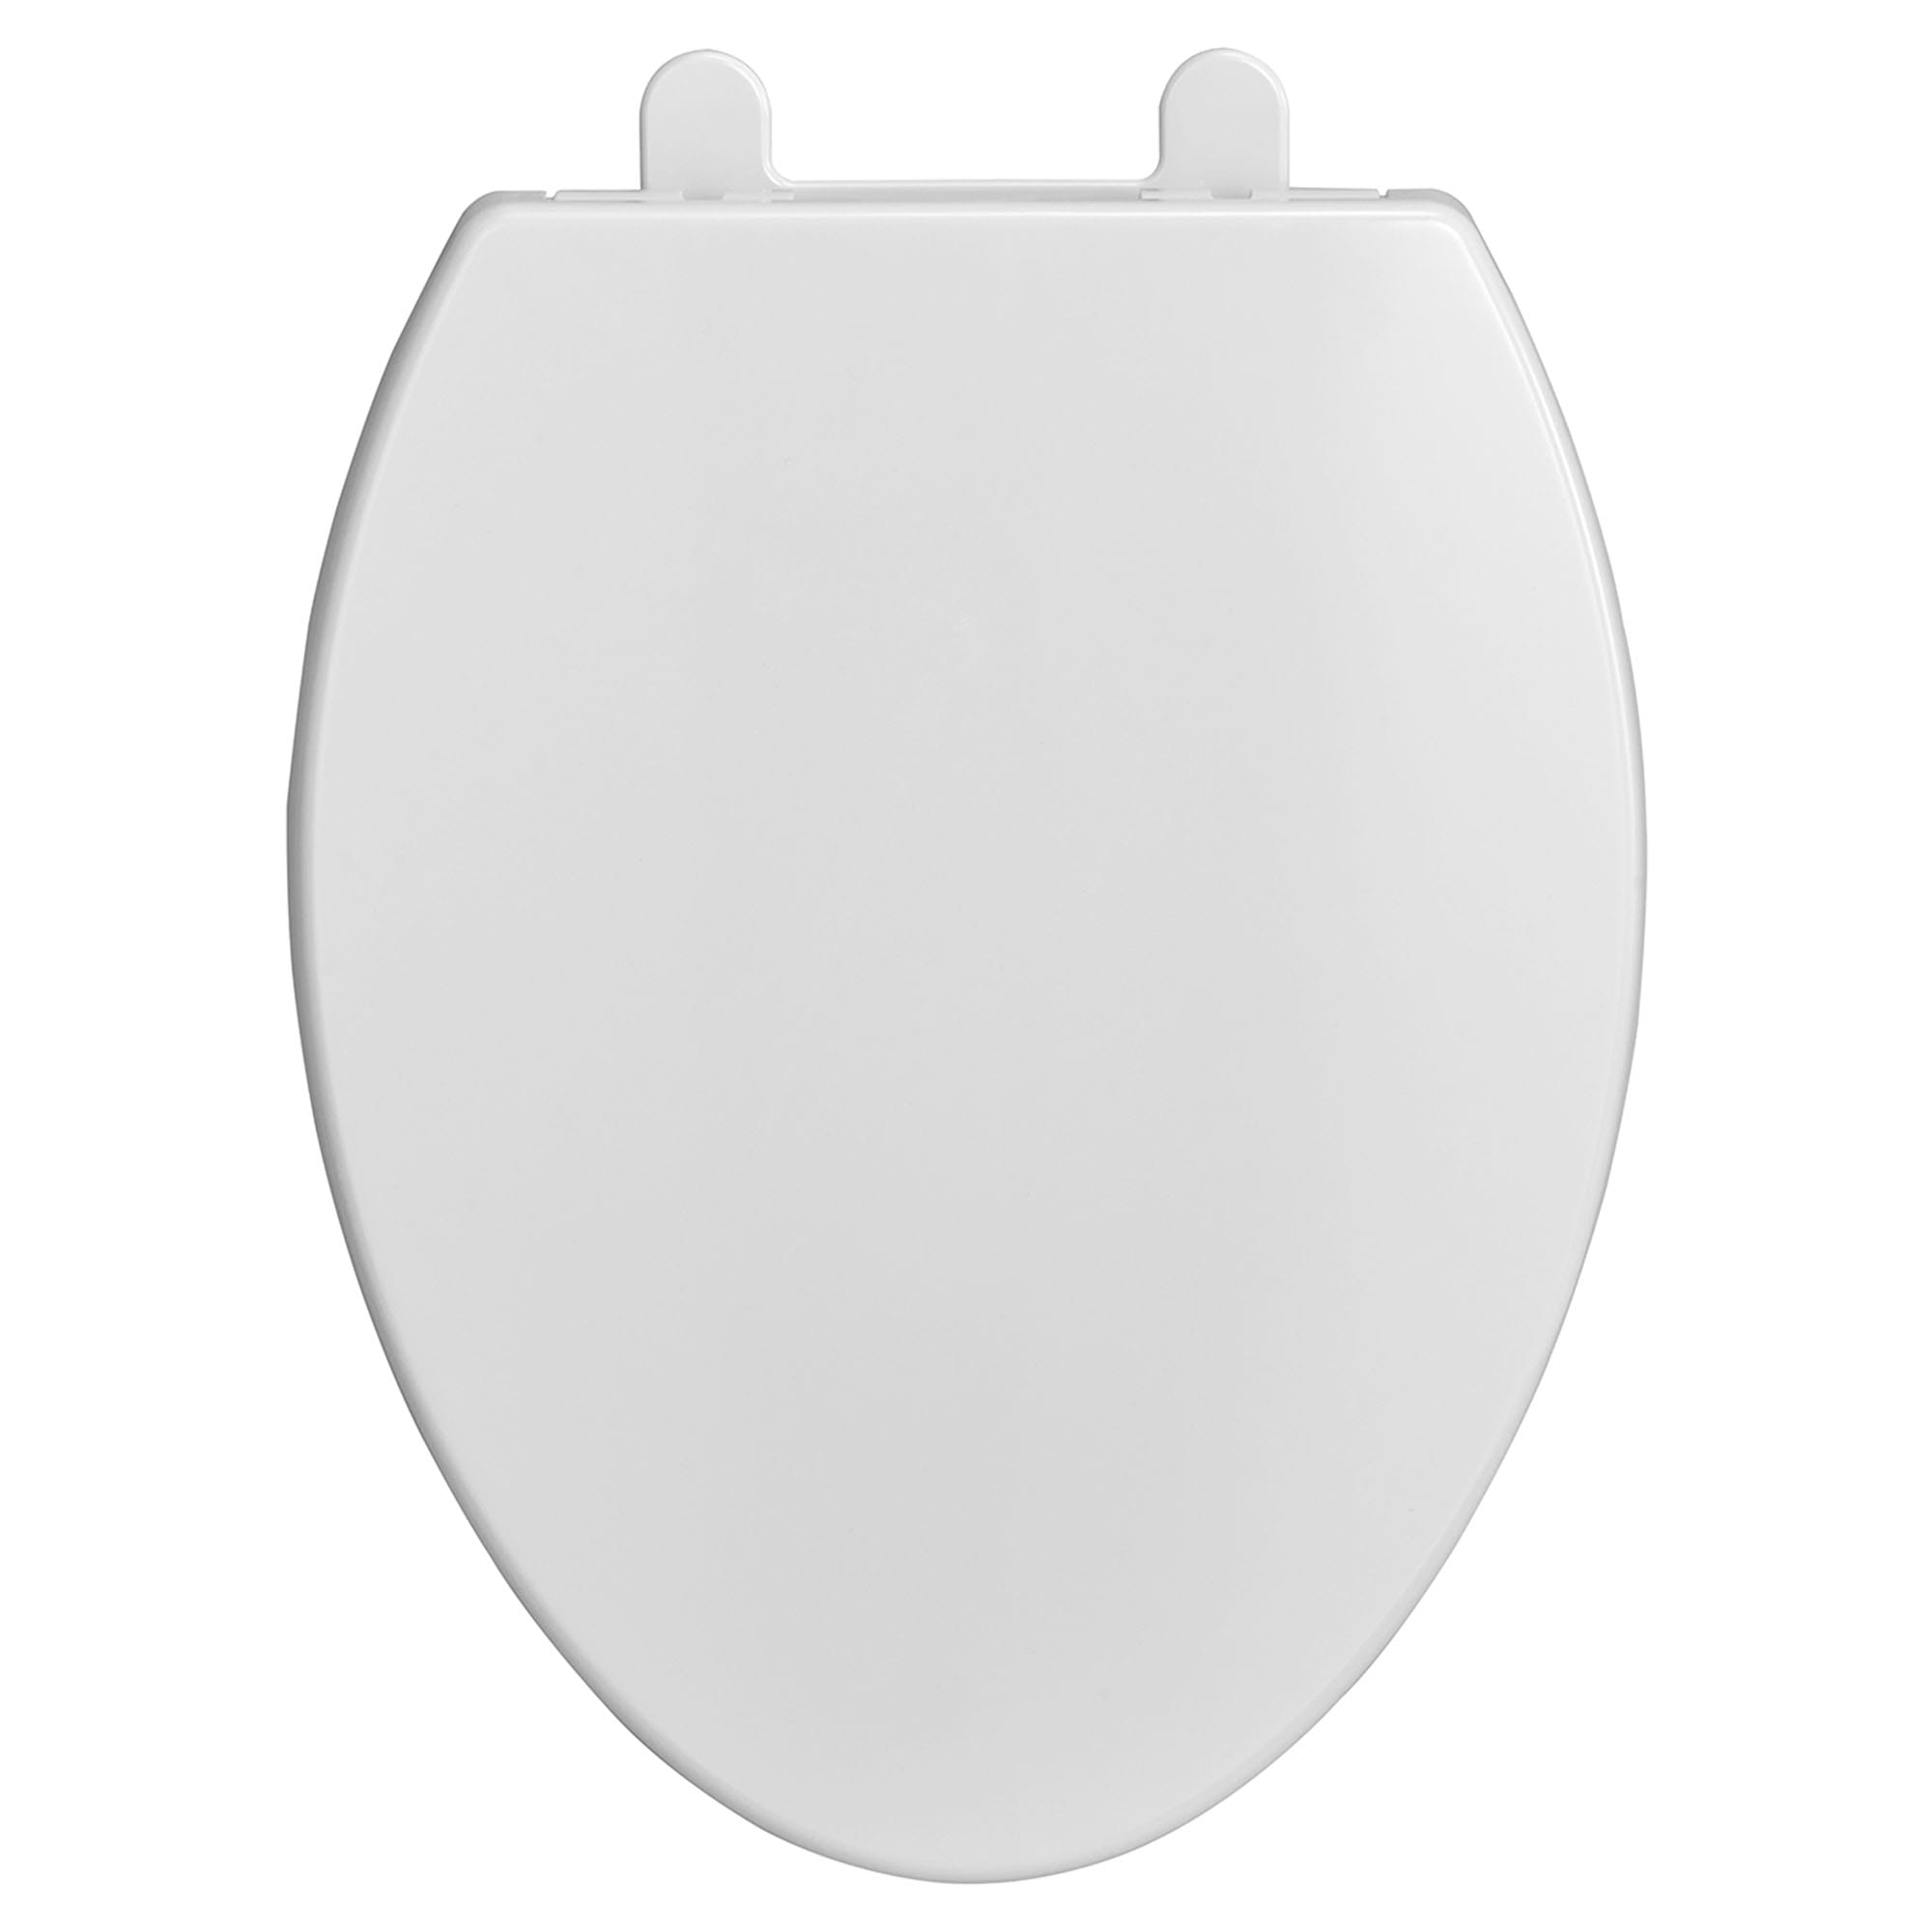 MUYE Elongated Slow-Close White Toilet Seat Never Loosen Removable Toilet Seats No Slamming Easy Installation & Clean 